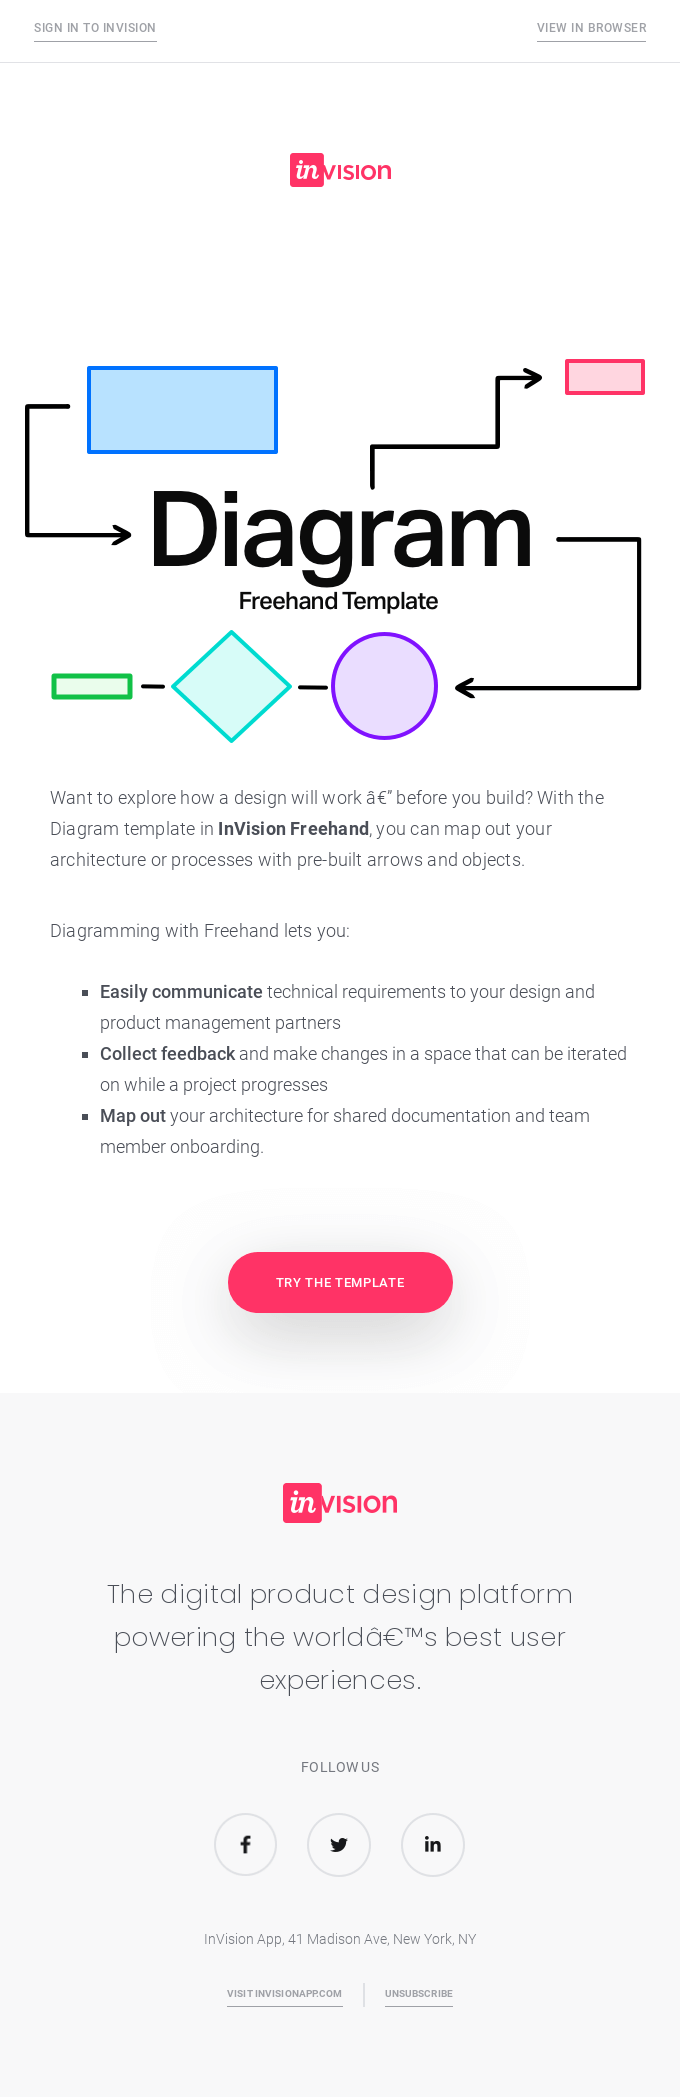 Start diagramming with Freehand - Invision Email Newsletter